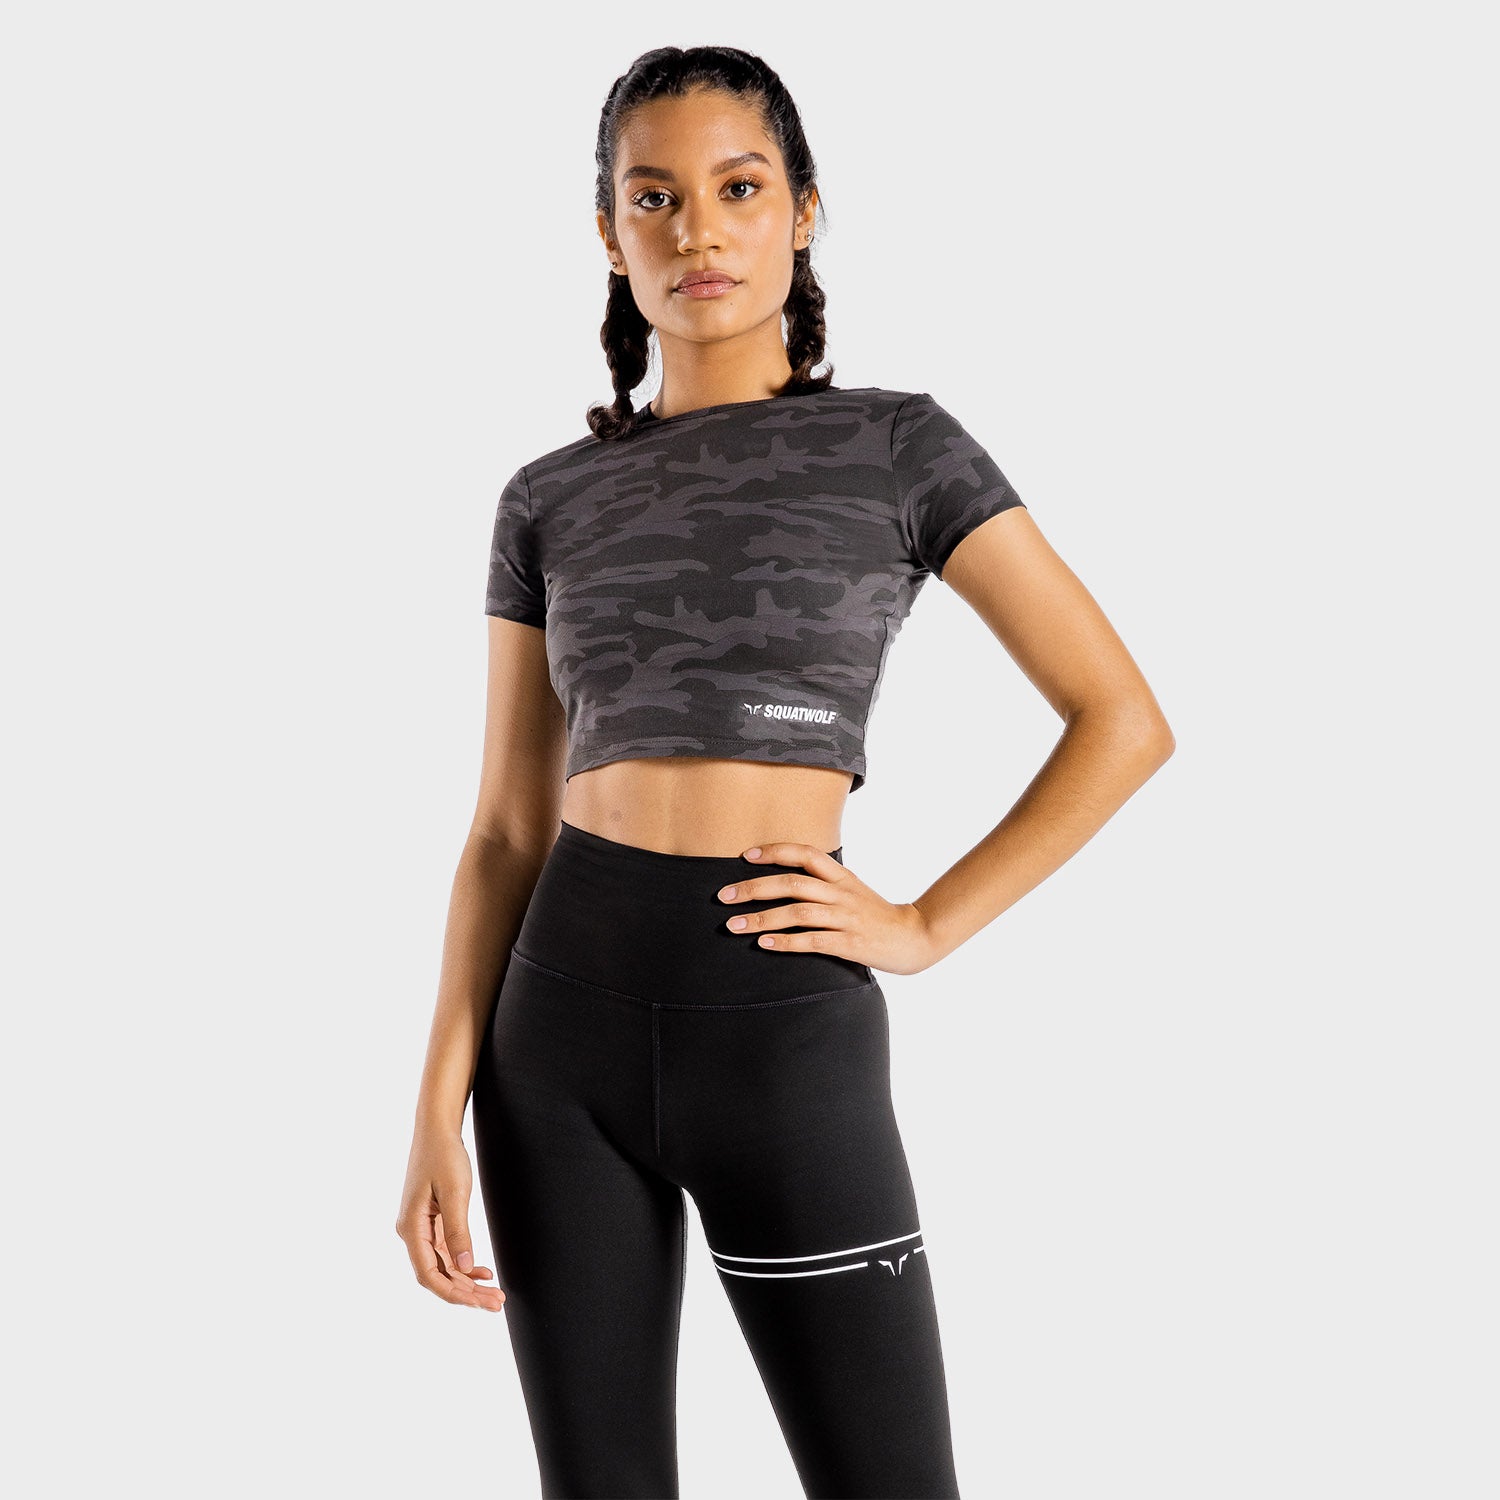 squatwolf-gym-t-shirts-for-women-warrior-crop-tee-half-sleeves-camo-workout-clothes